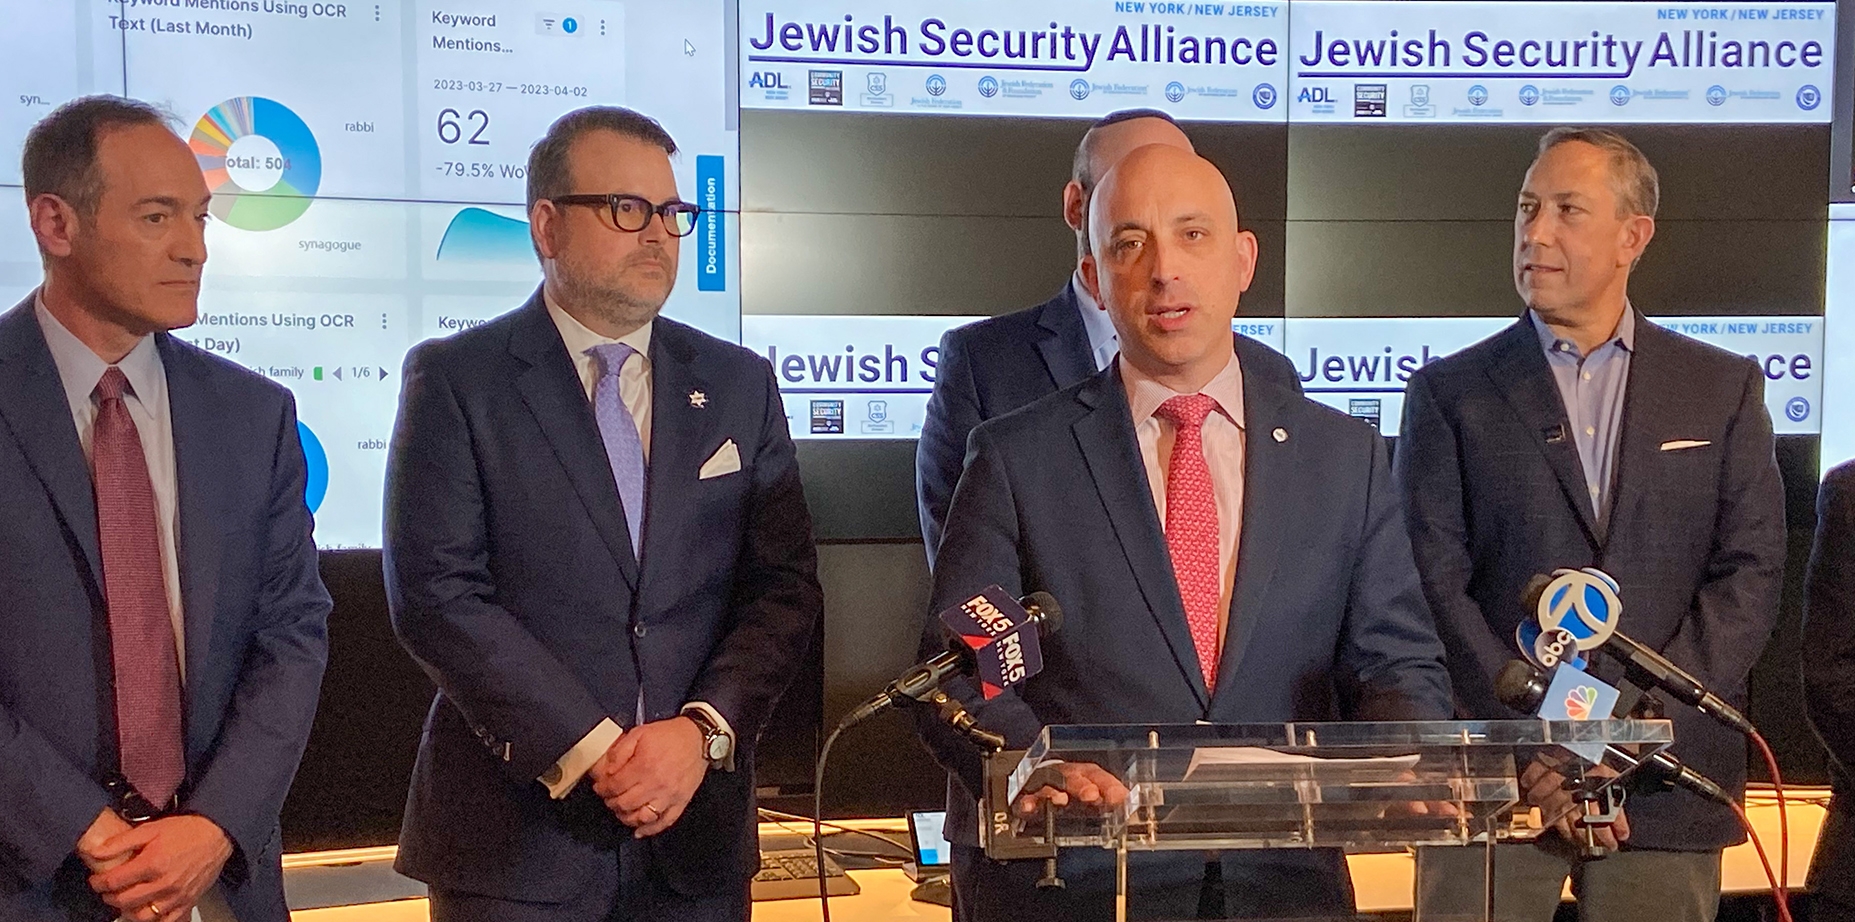 Anti Defamation League CEO Jonathan Greenblatt speaks at a press conference announcing the Jewish Security Alliance at the ADL’s investigative research lab. Behind him is Scott Richman, the regional director of ADL’s New York-New Jersey Office, CSS CEO Evan Bernstein and CSI Executive Director Mitch Silber. (Photo Credit: Jacob Henry)